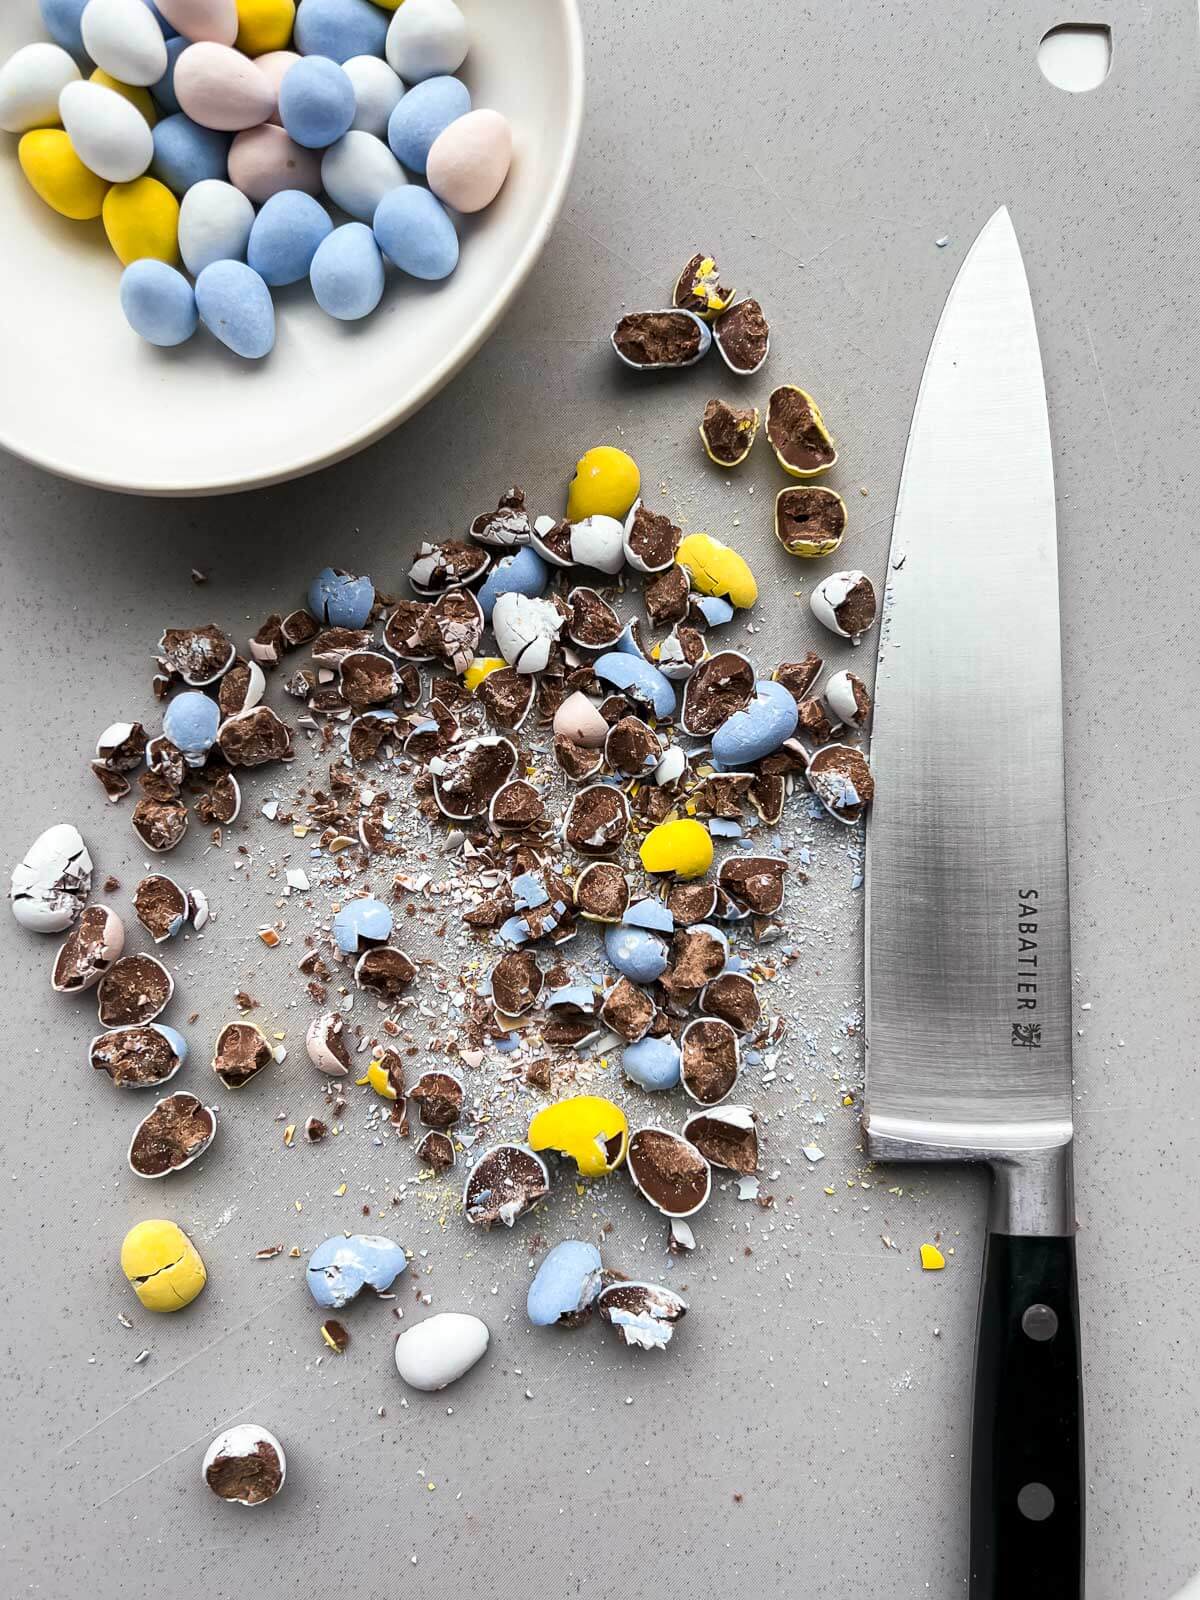 Chopping Cadbury Mini Eggs with a chef's knife to make Easter brownies.